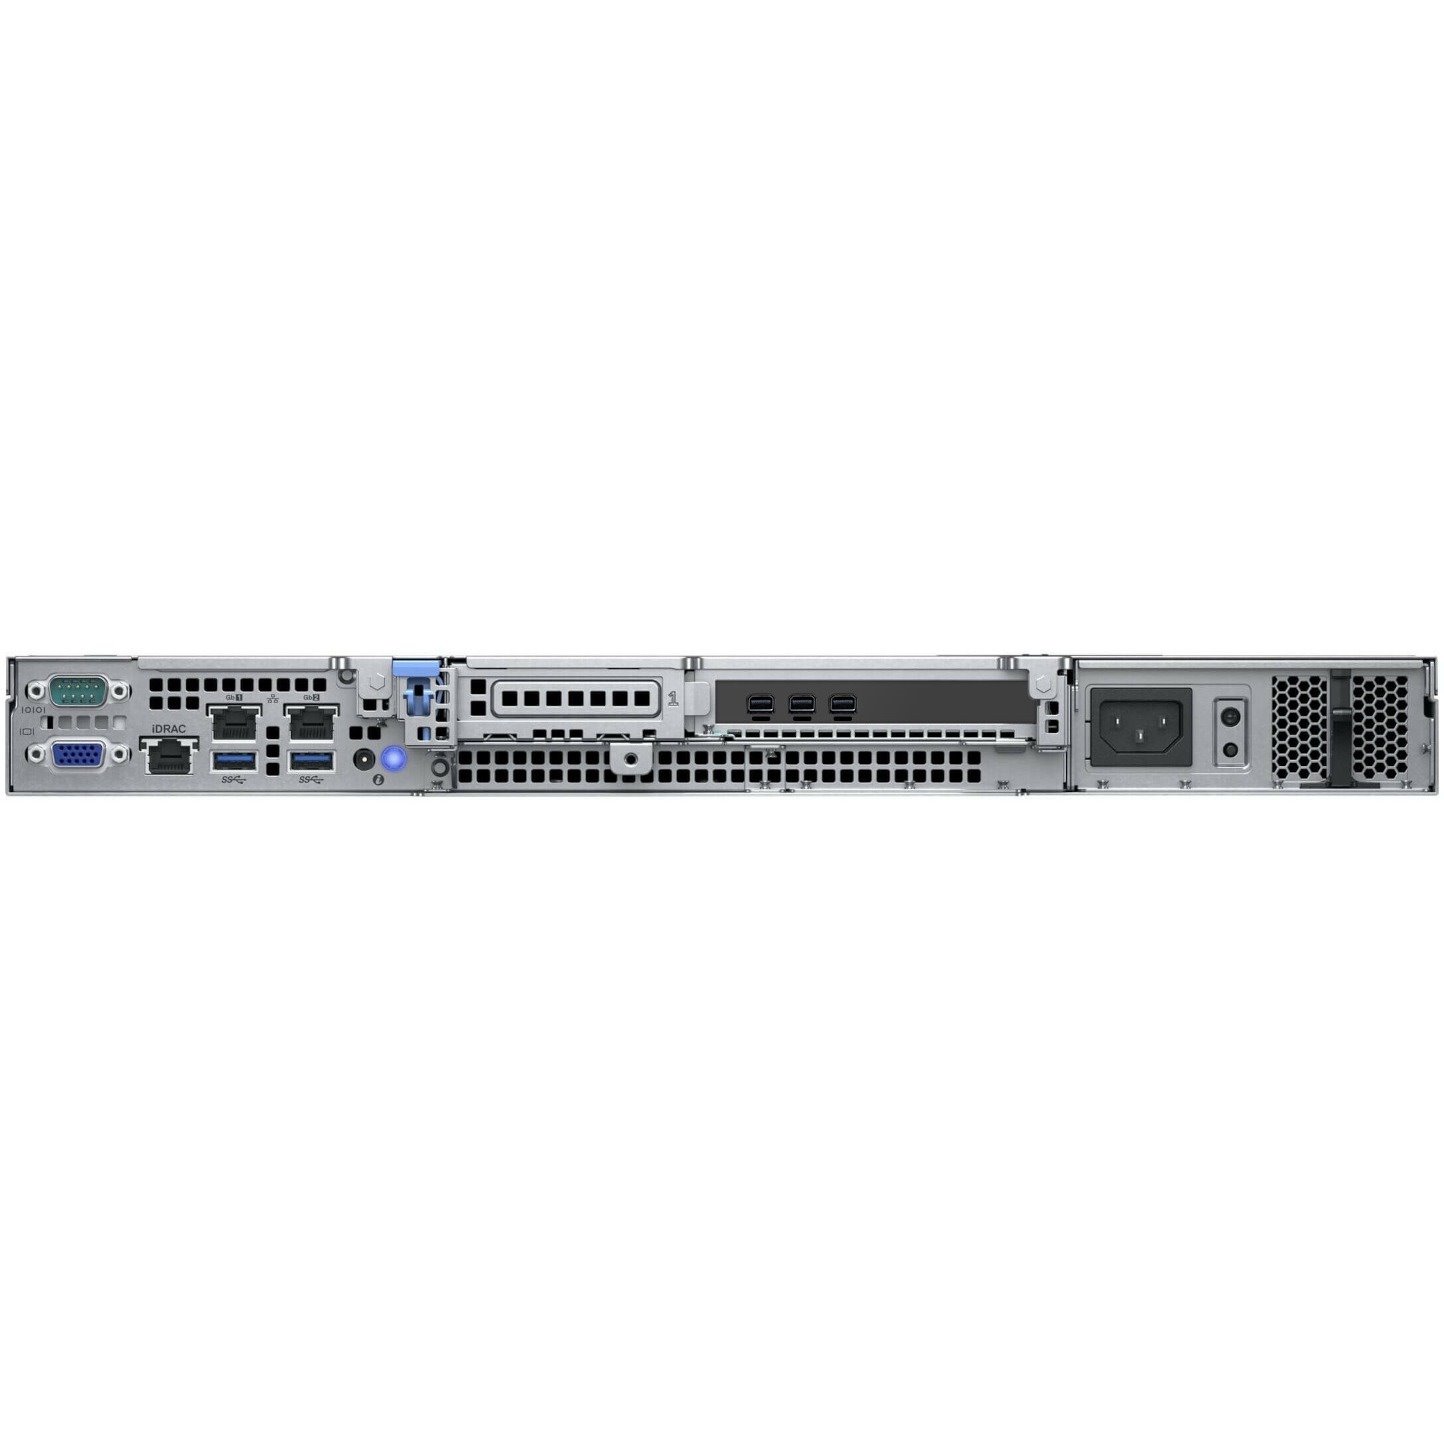 Wisenet WAVE Network Video Recorder - 48 TB HDD